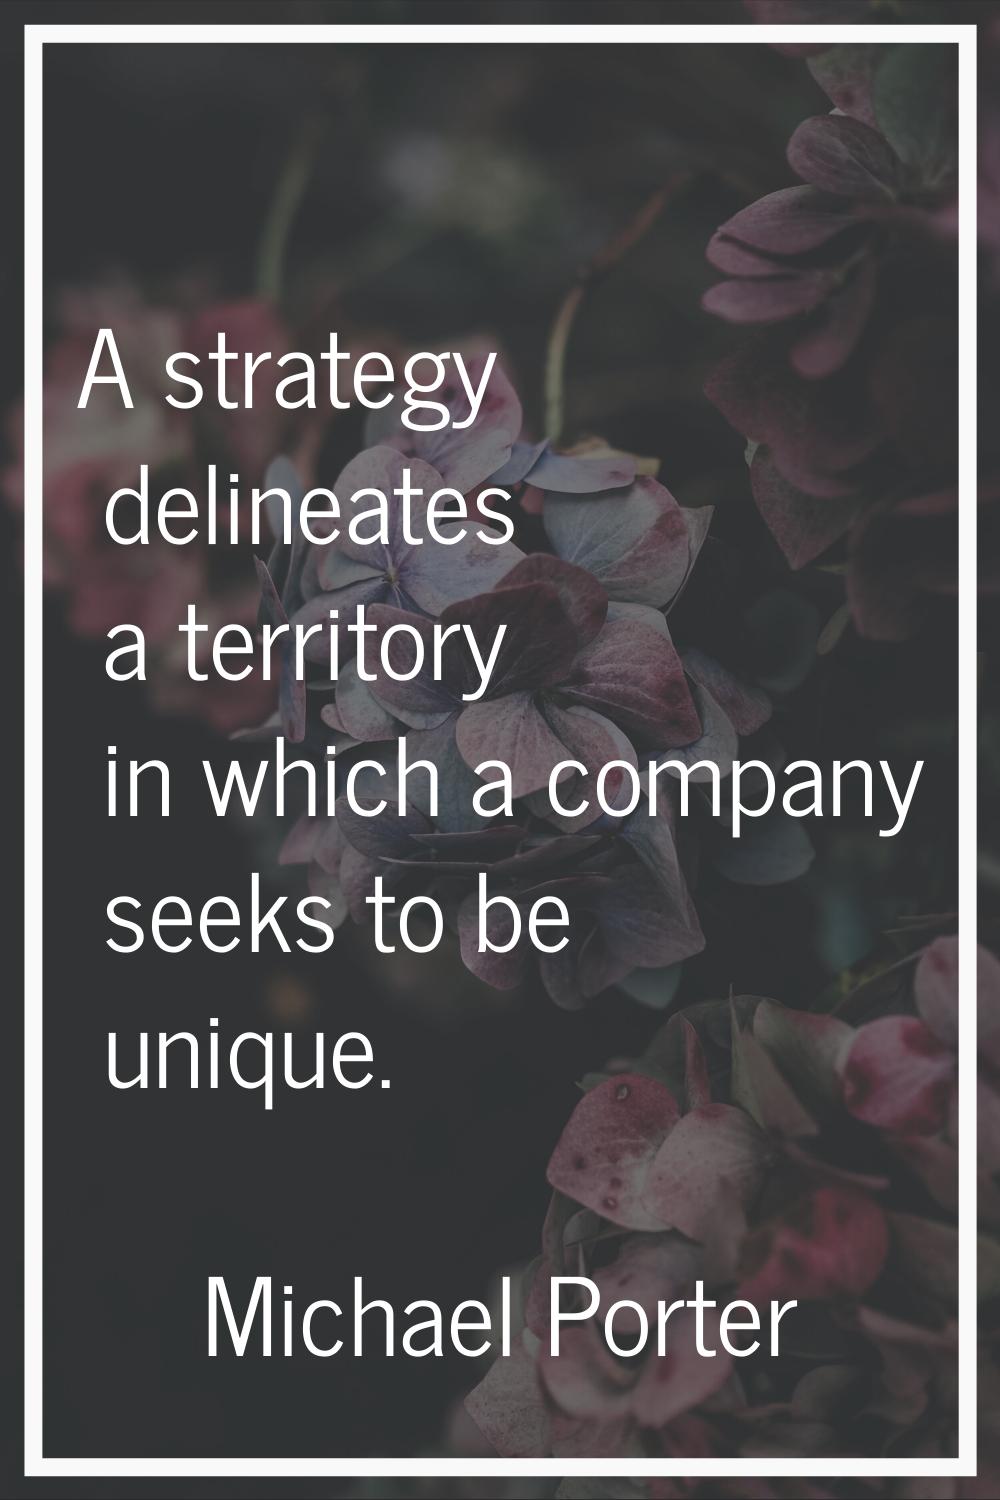 A strategy delineates a territory in which a company seeks to be unique.